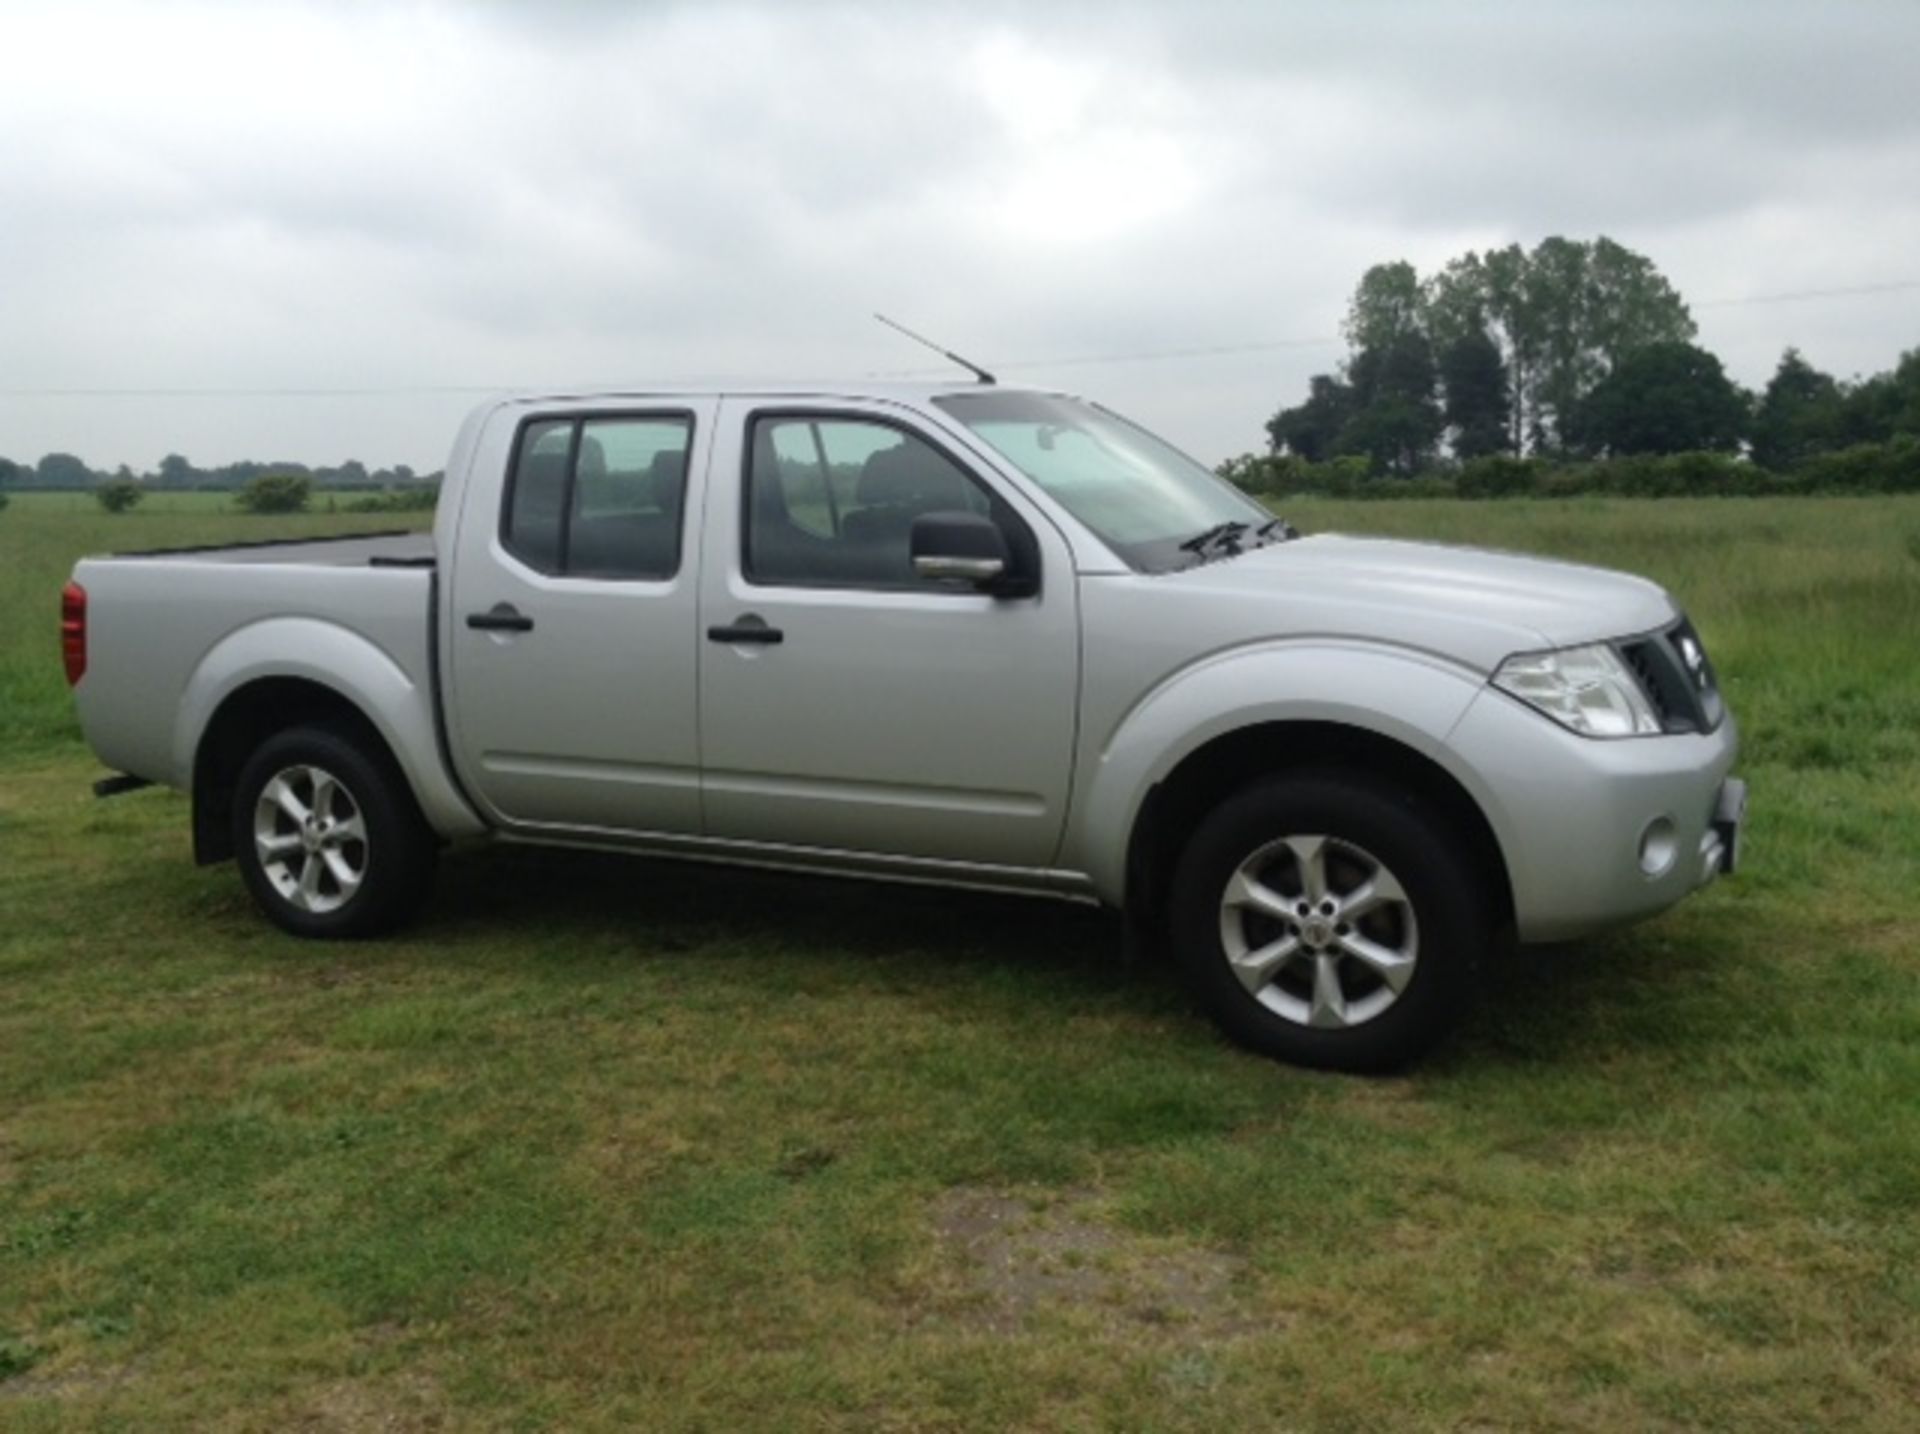 64 Reg Nissan Navara 2.5d truck 61k miles 4 stamps just been serviced a/c alloys - Image 2 of 12